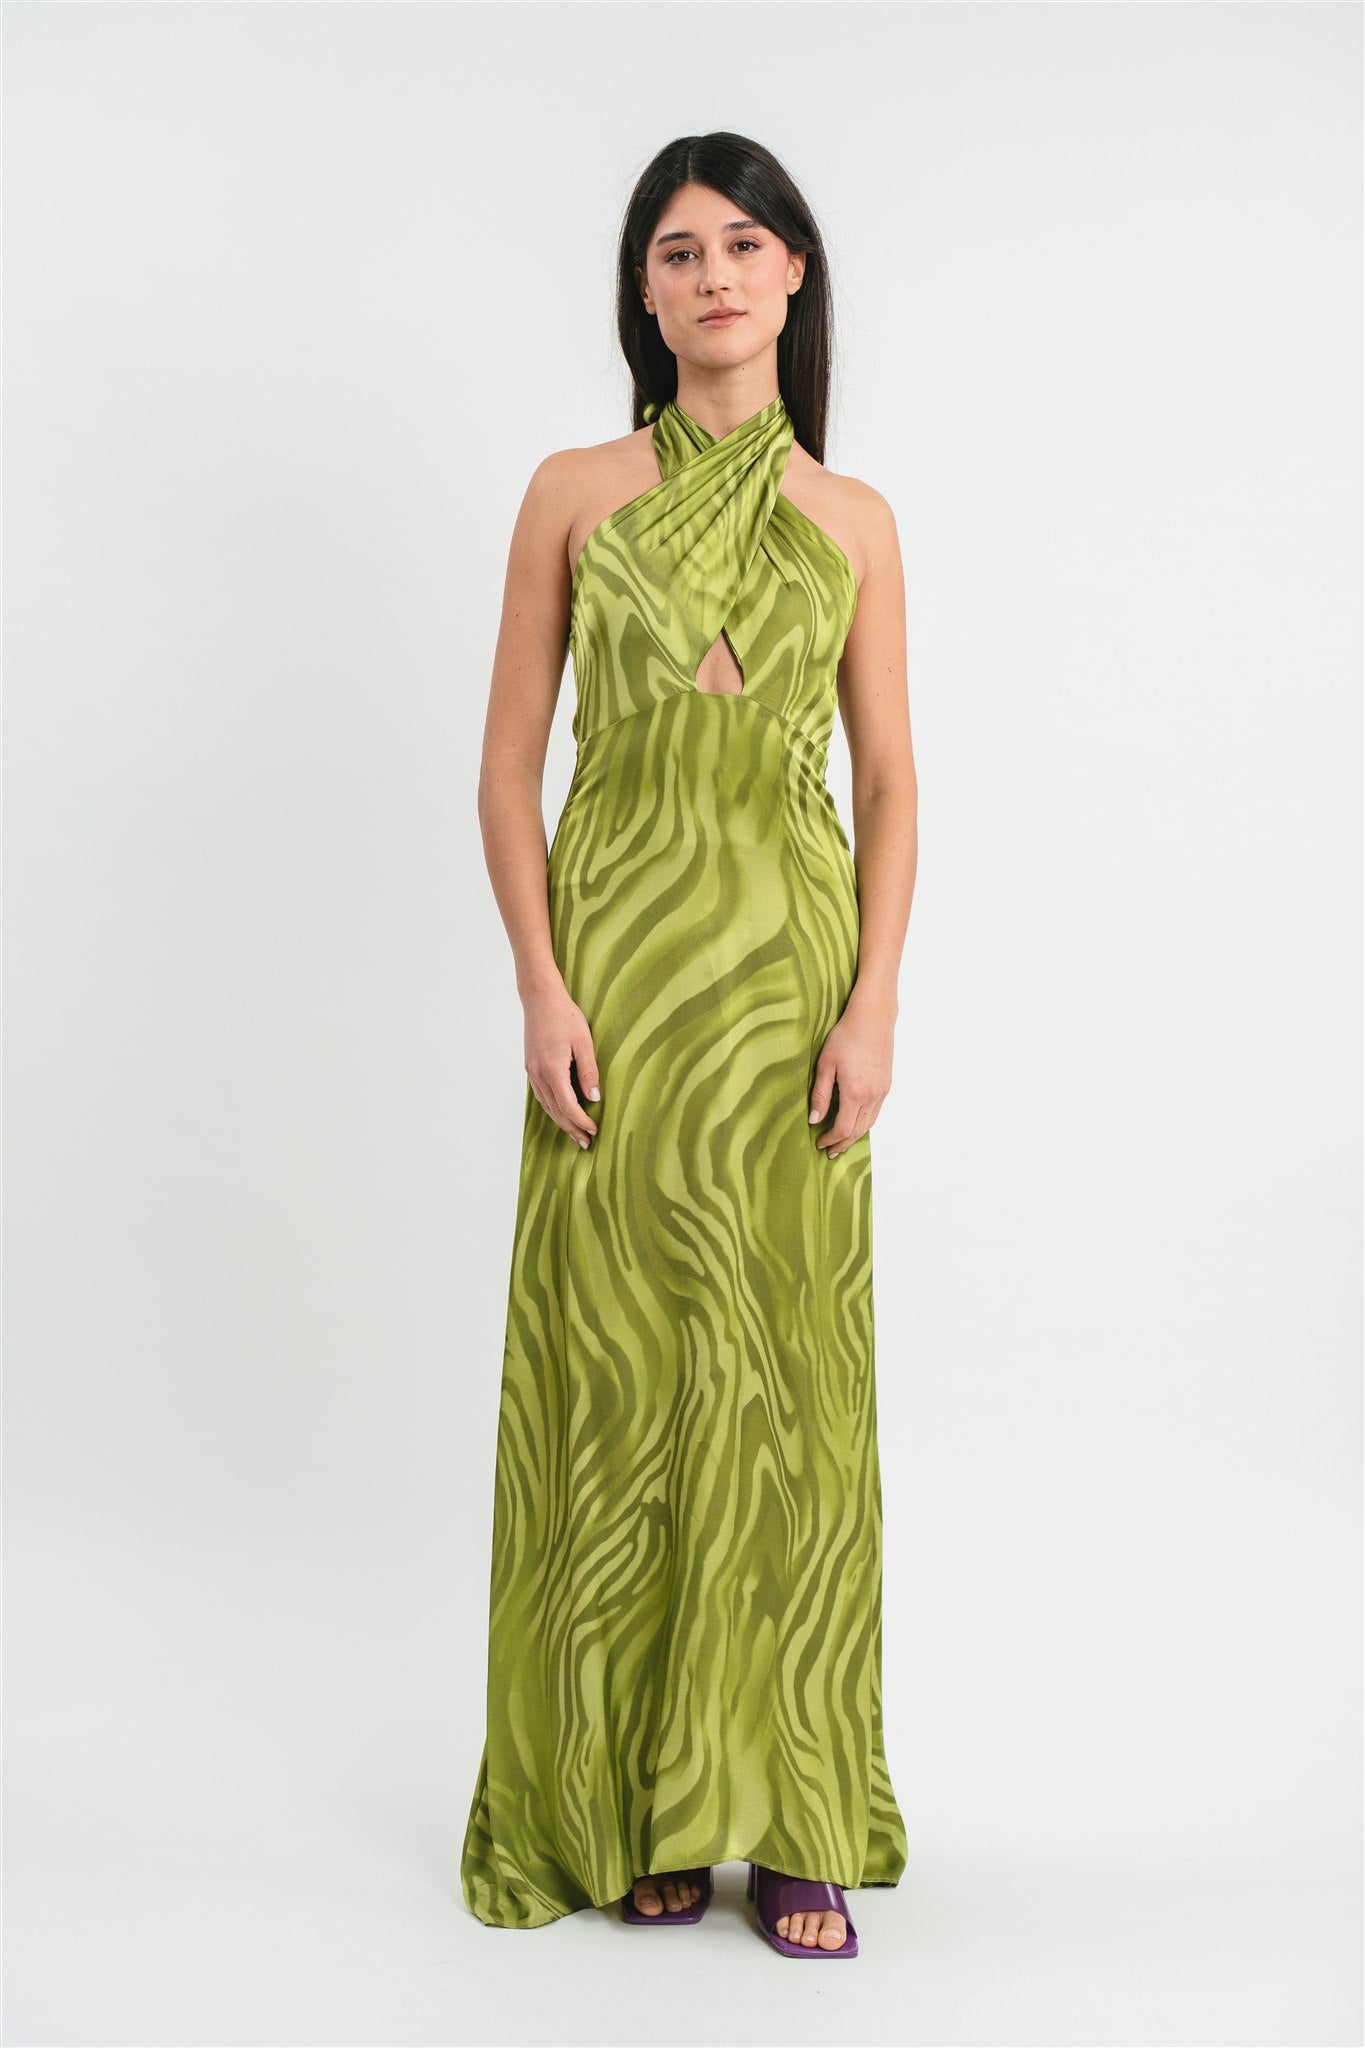 Long dress with crossed bands at the breast, in an optical print